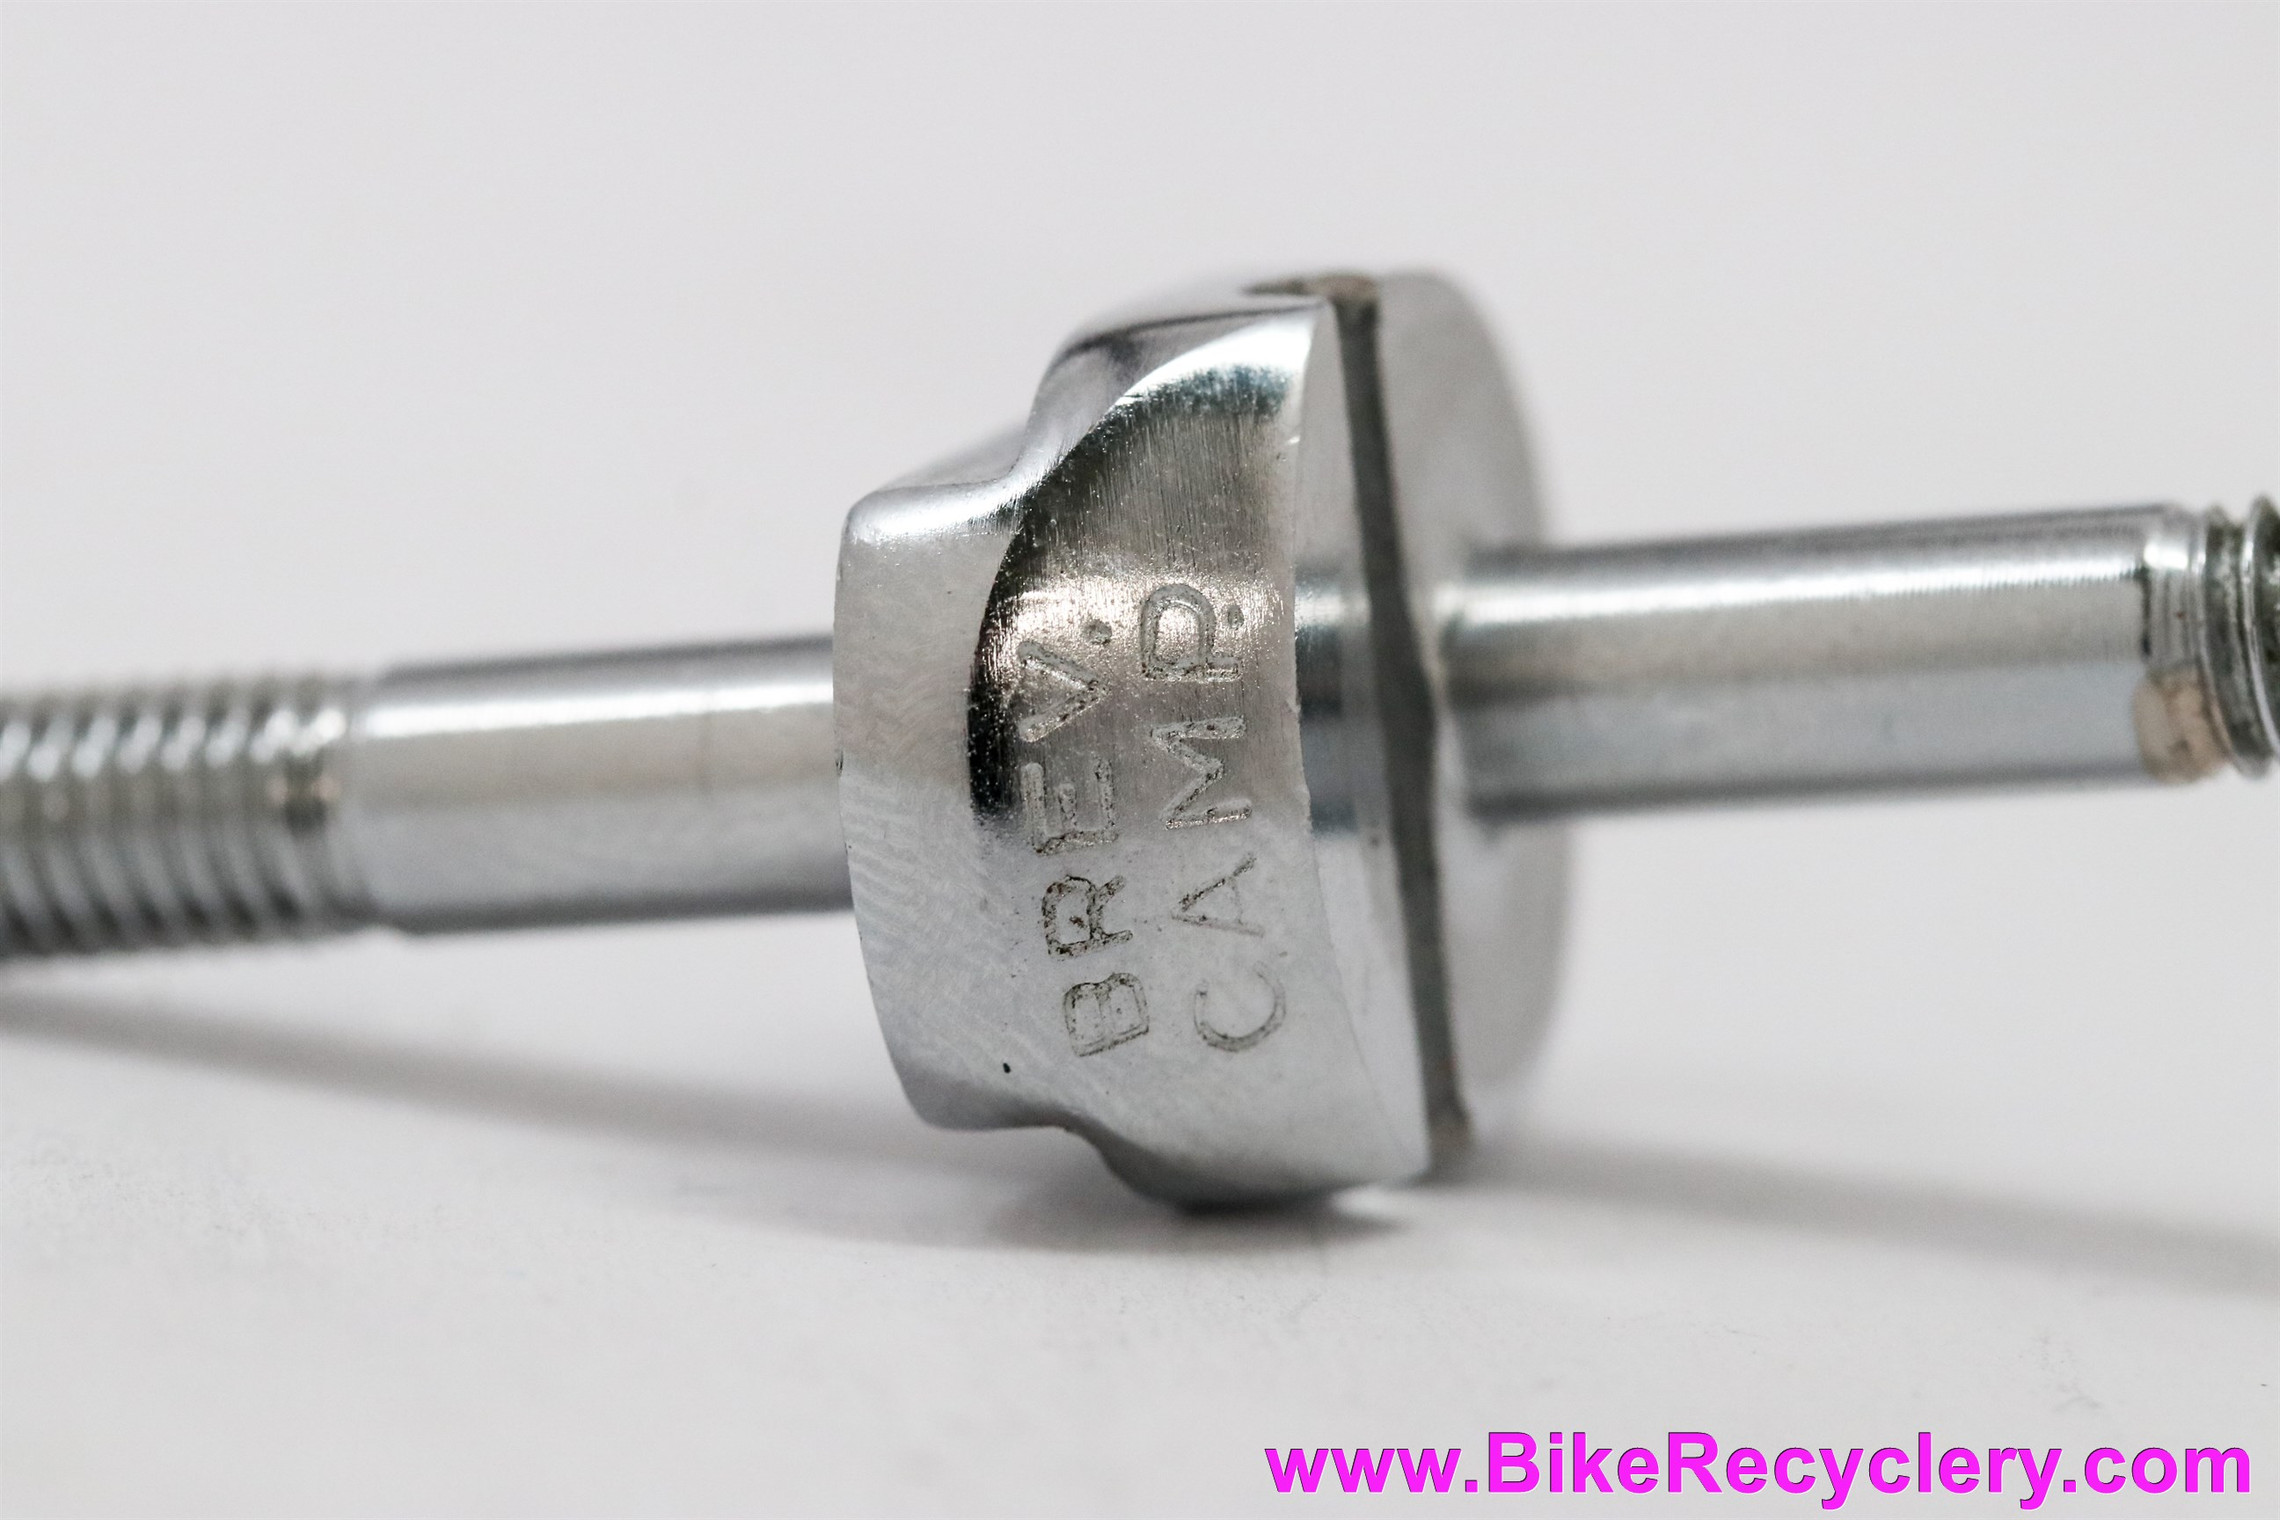 NIB/NOS Campagnolo Brake Drop Bolt: Rear Nutted or Front Recessed